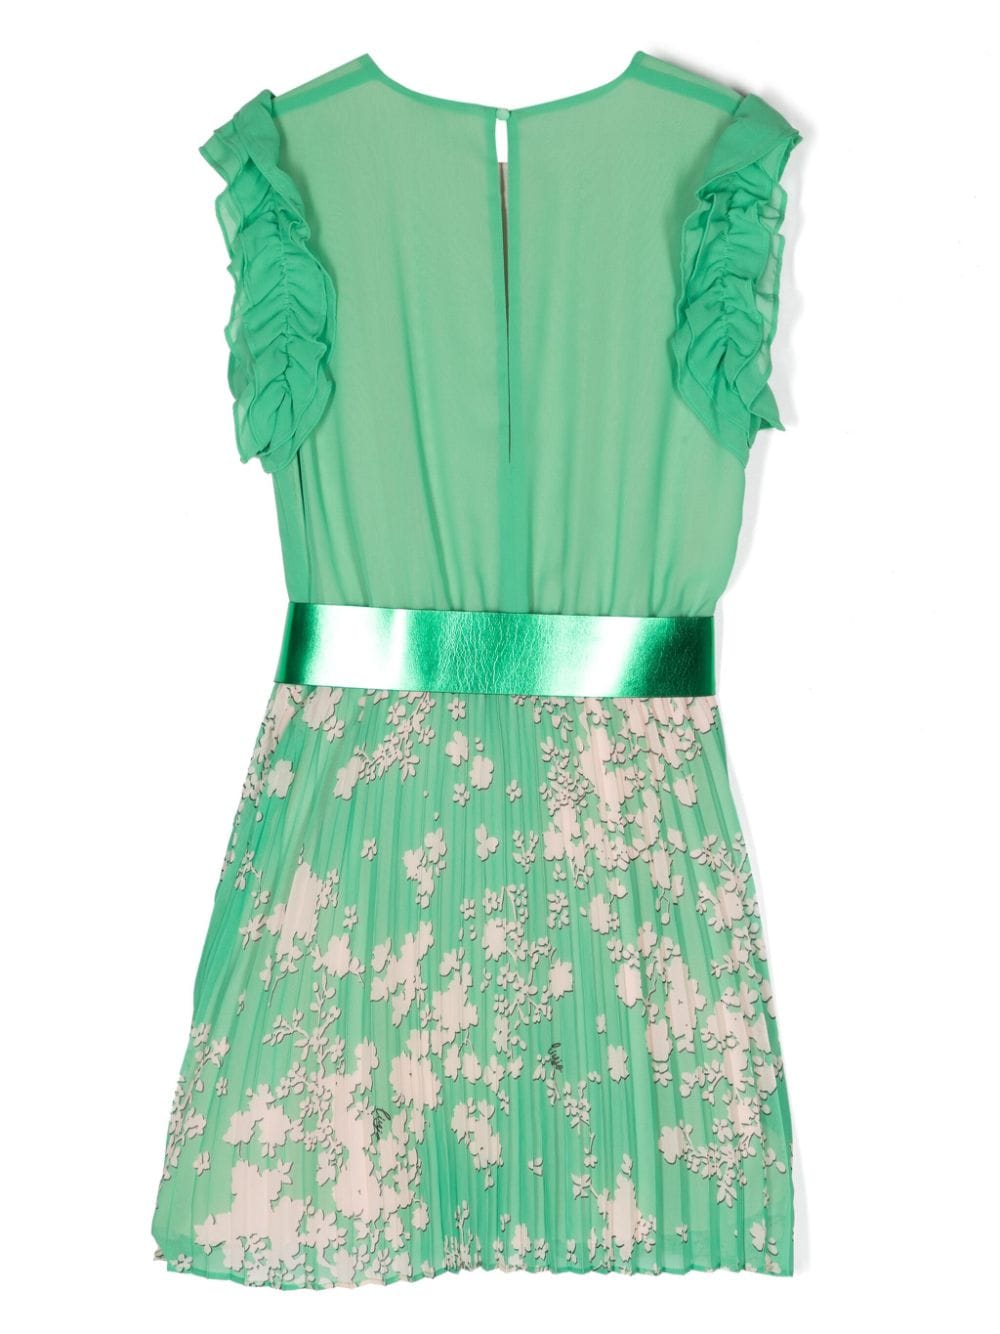 Green and pink dress for girls